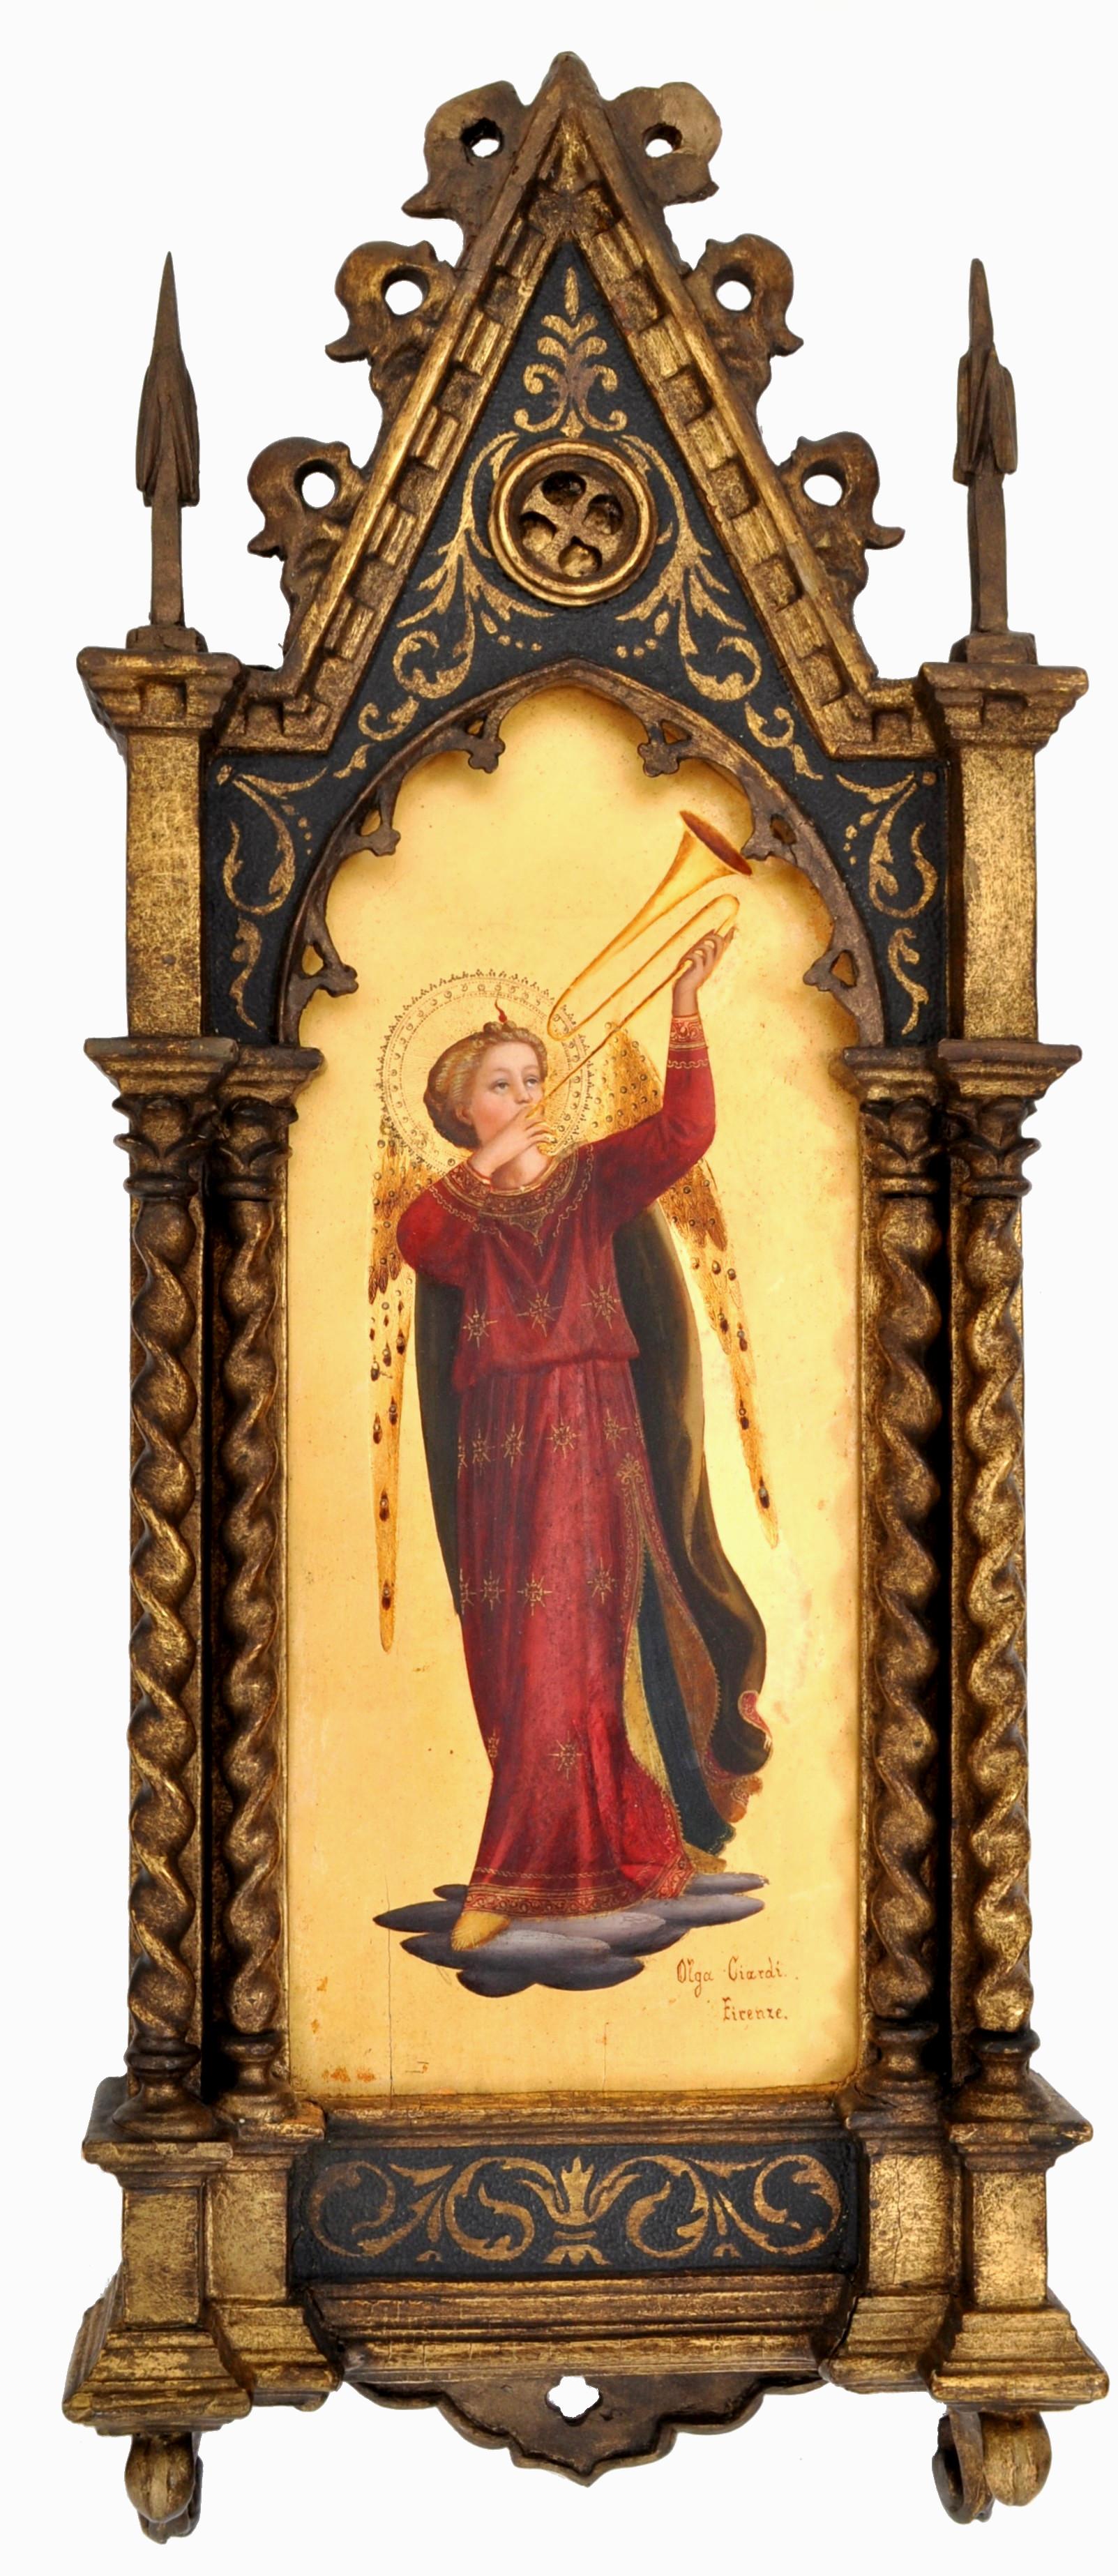 Pair of fine antique 19th Century Italian Florentine Painted Gothic Renaissance Panels by Olga Ciardi, circa 1850. The panels painted in egg tempera and in the manner of the early Renaissance artist Fra Giovanni Angelico. Each painting portraying an